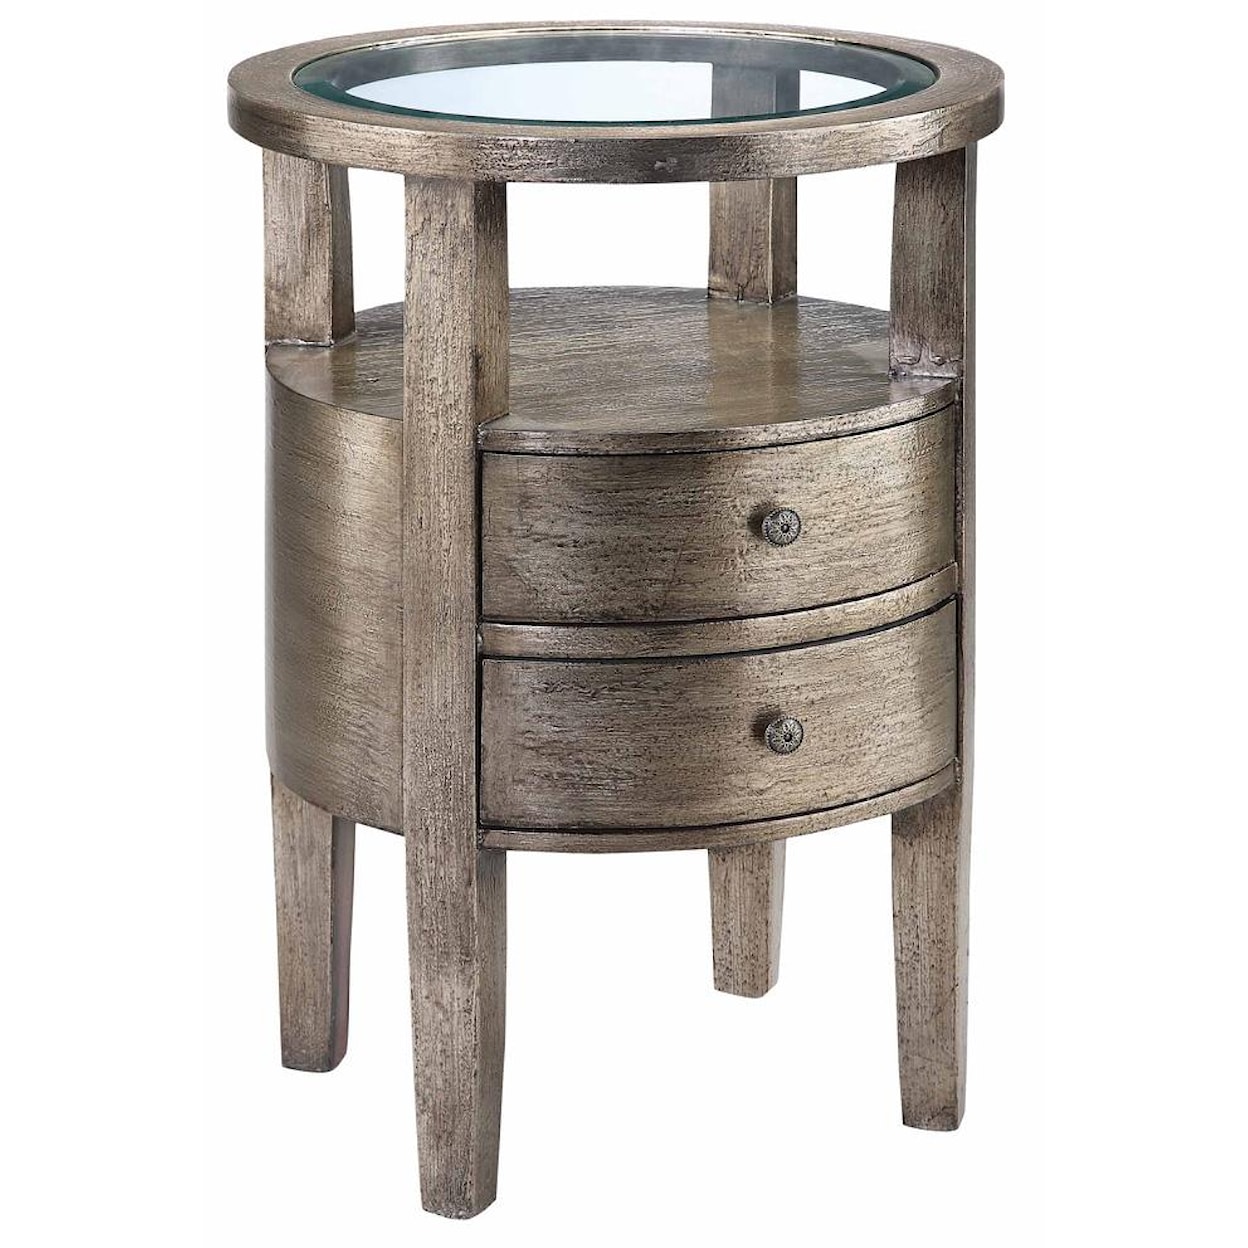 Stein World Accent Tables Round Accent Table